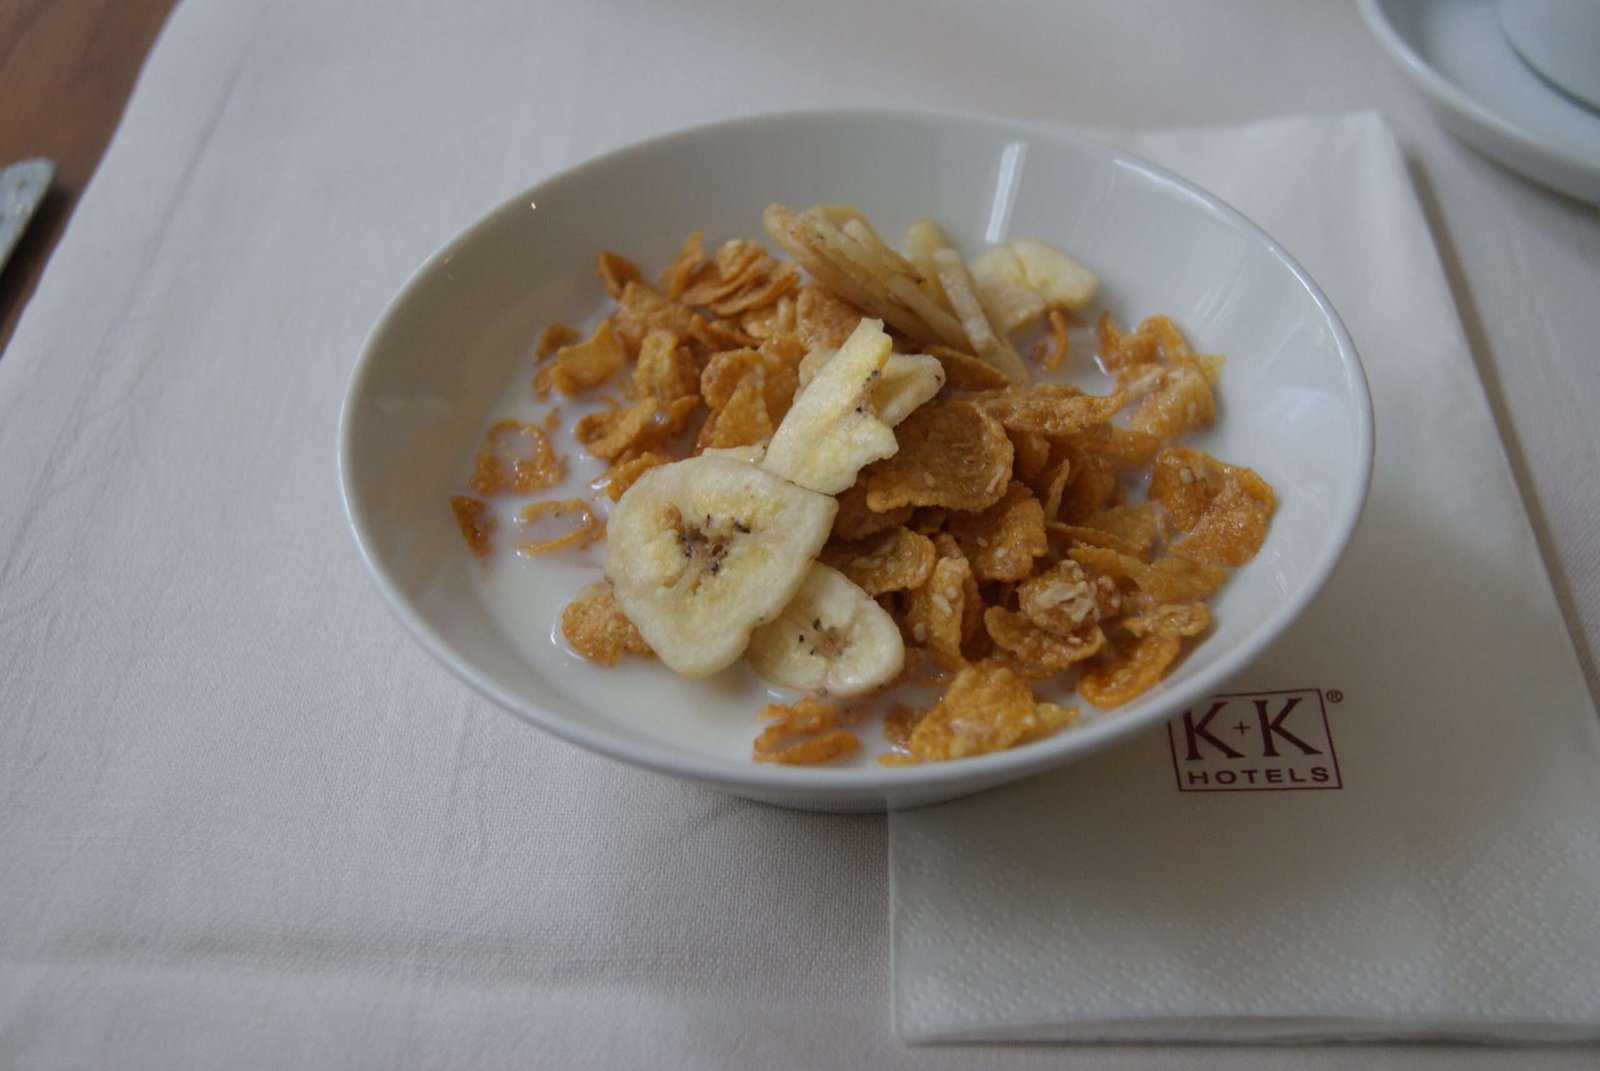 A cereal breakfast as served in the K+K hotel in London in 2011. This photo was shot with Ghost's old Sony A330 DSLR.